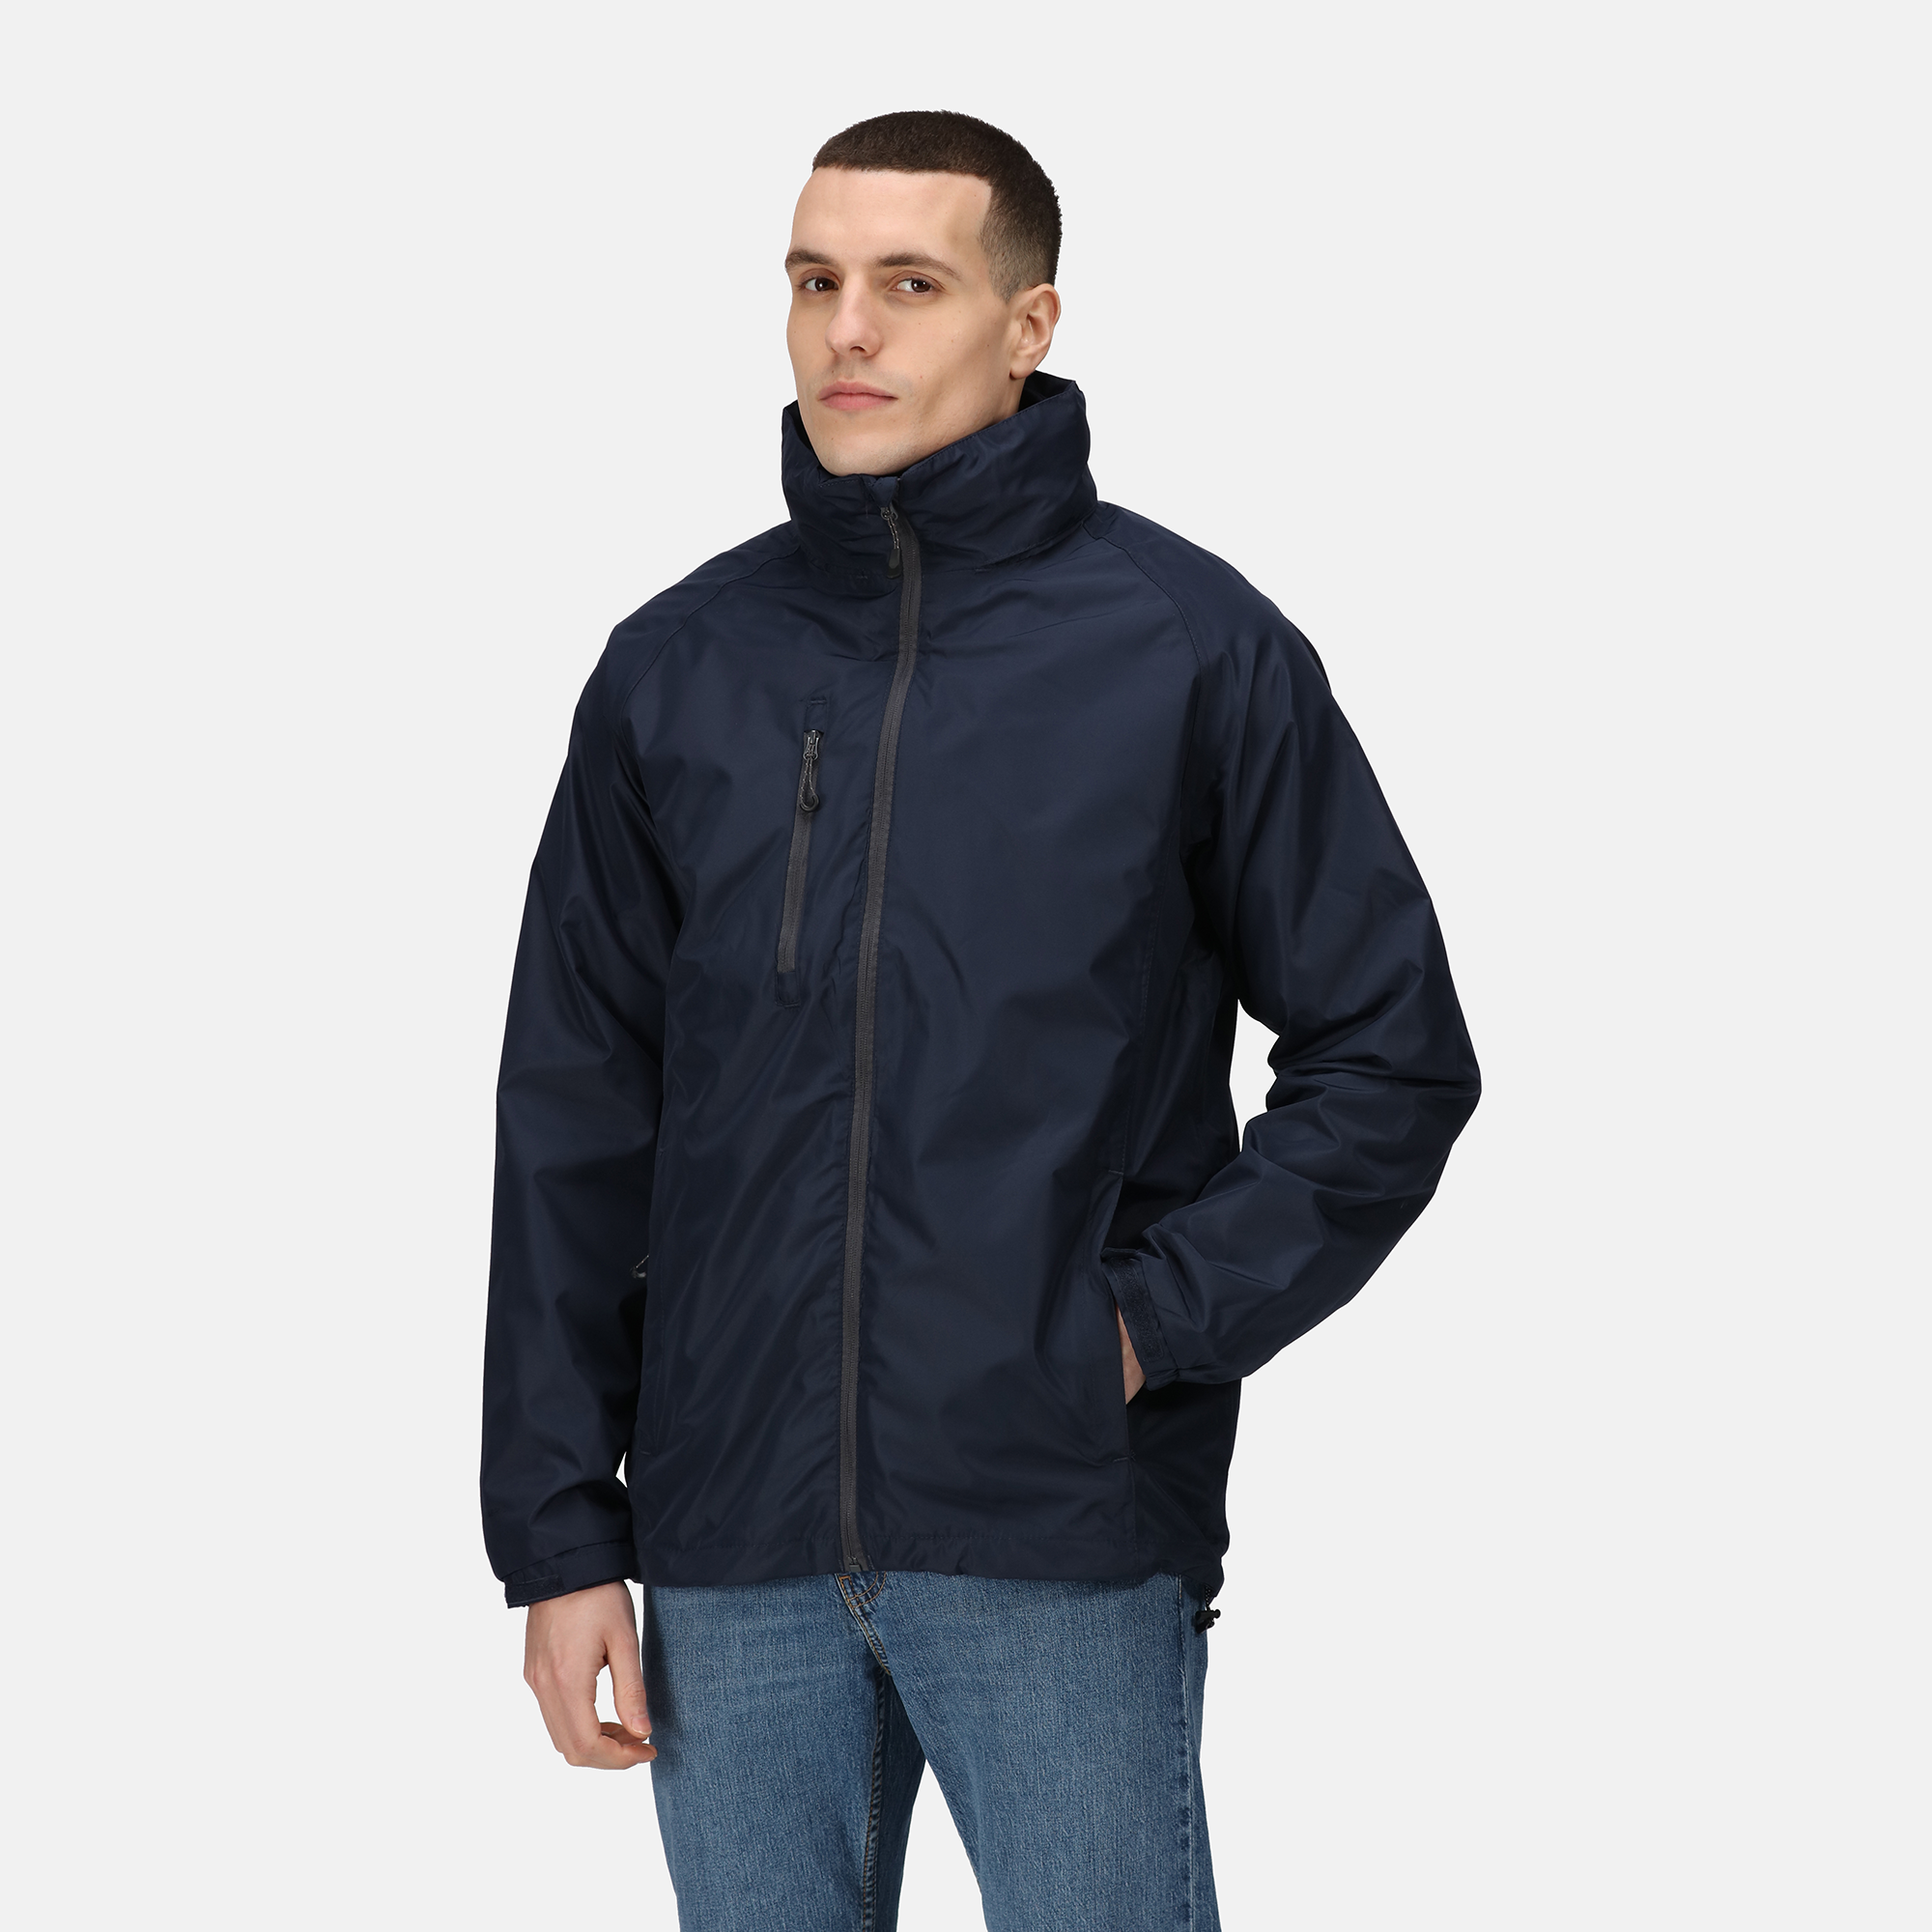 HONESTLY MADE RECYCLED 3-IN-1 JACKET WITH SOFTSHELL INNER - Regatta ...